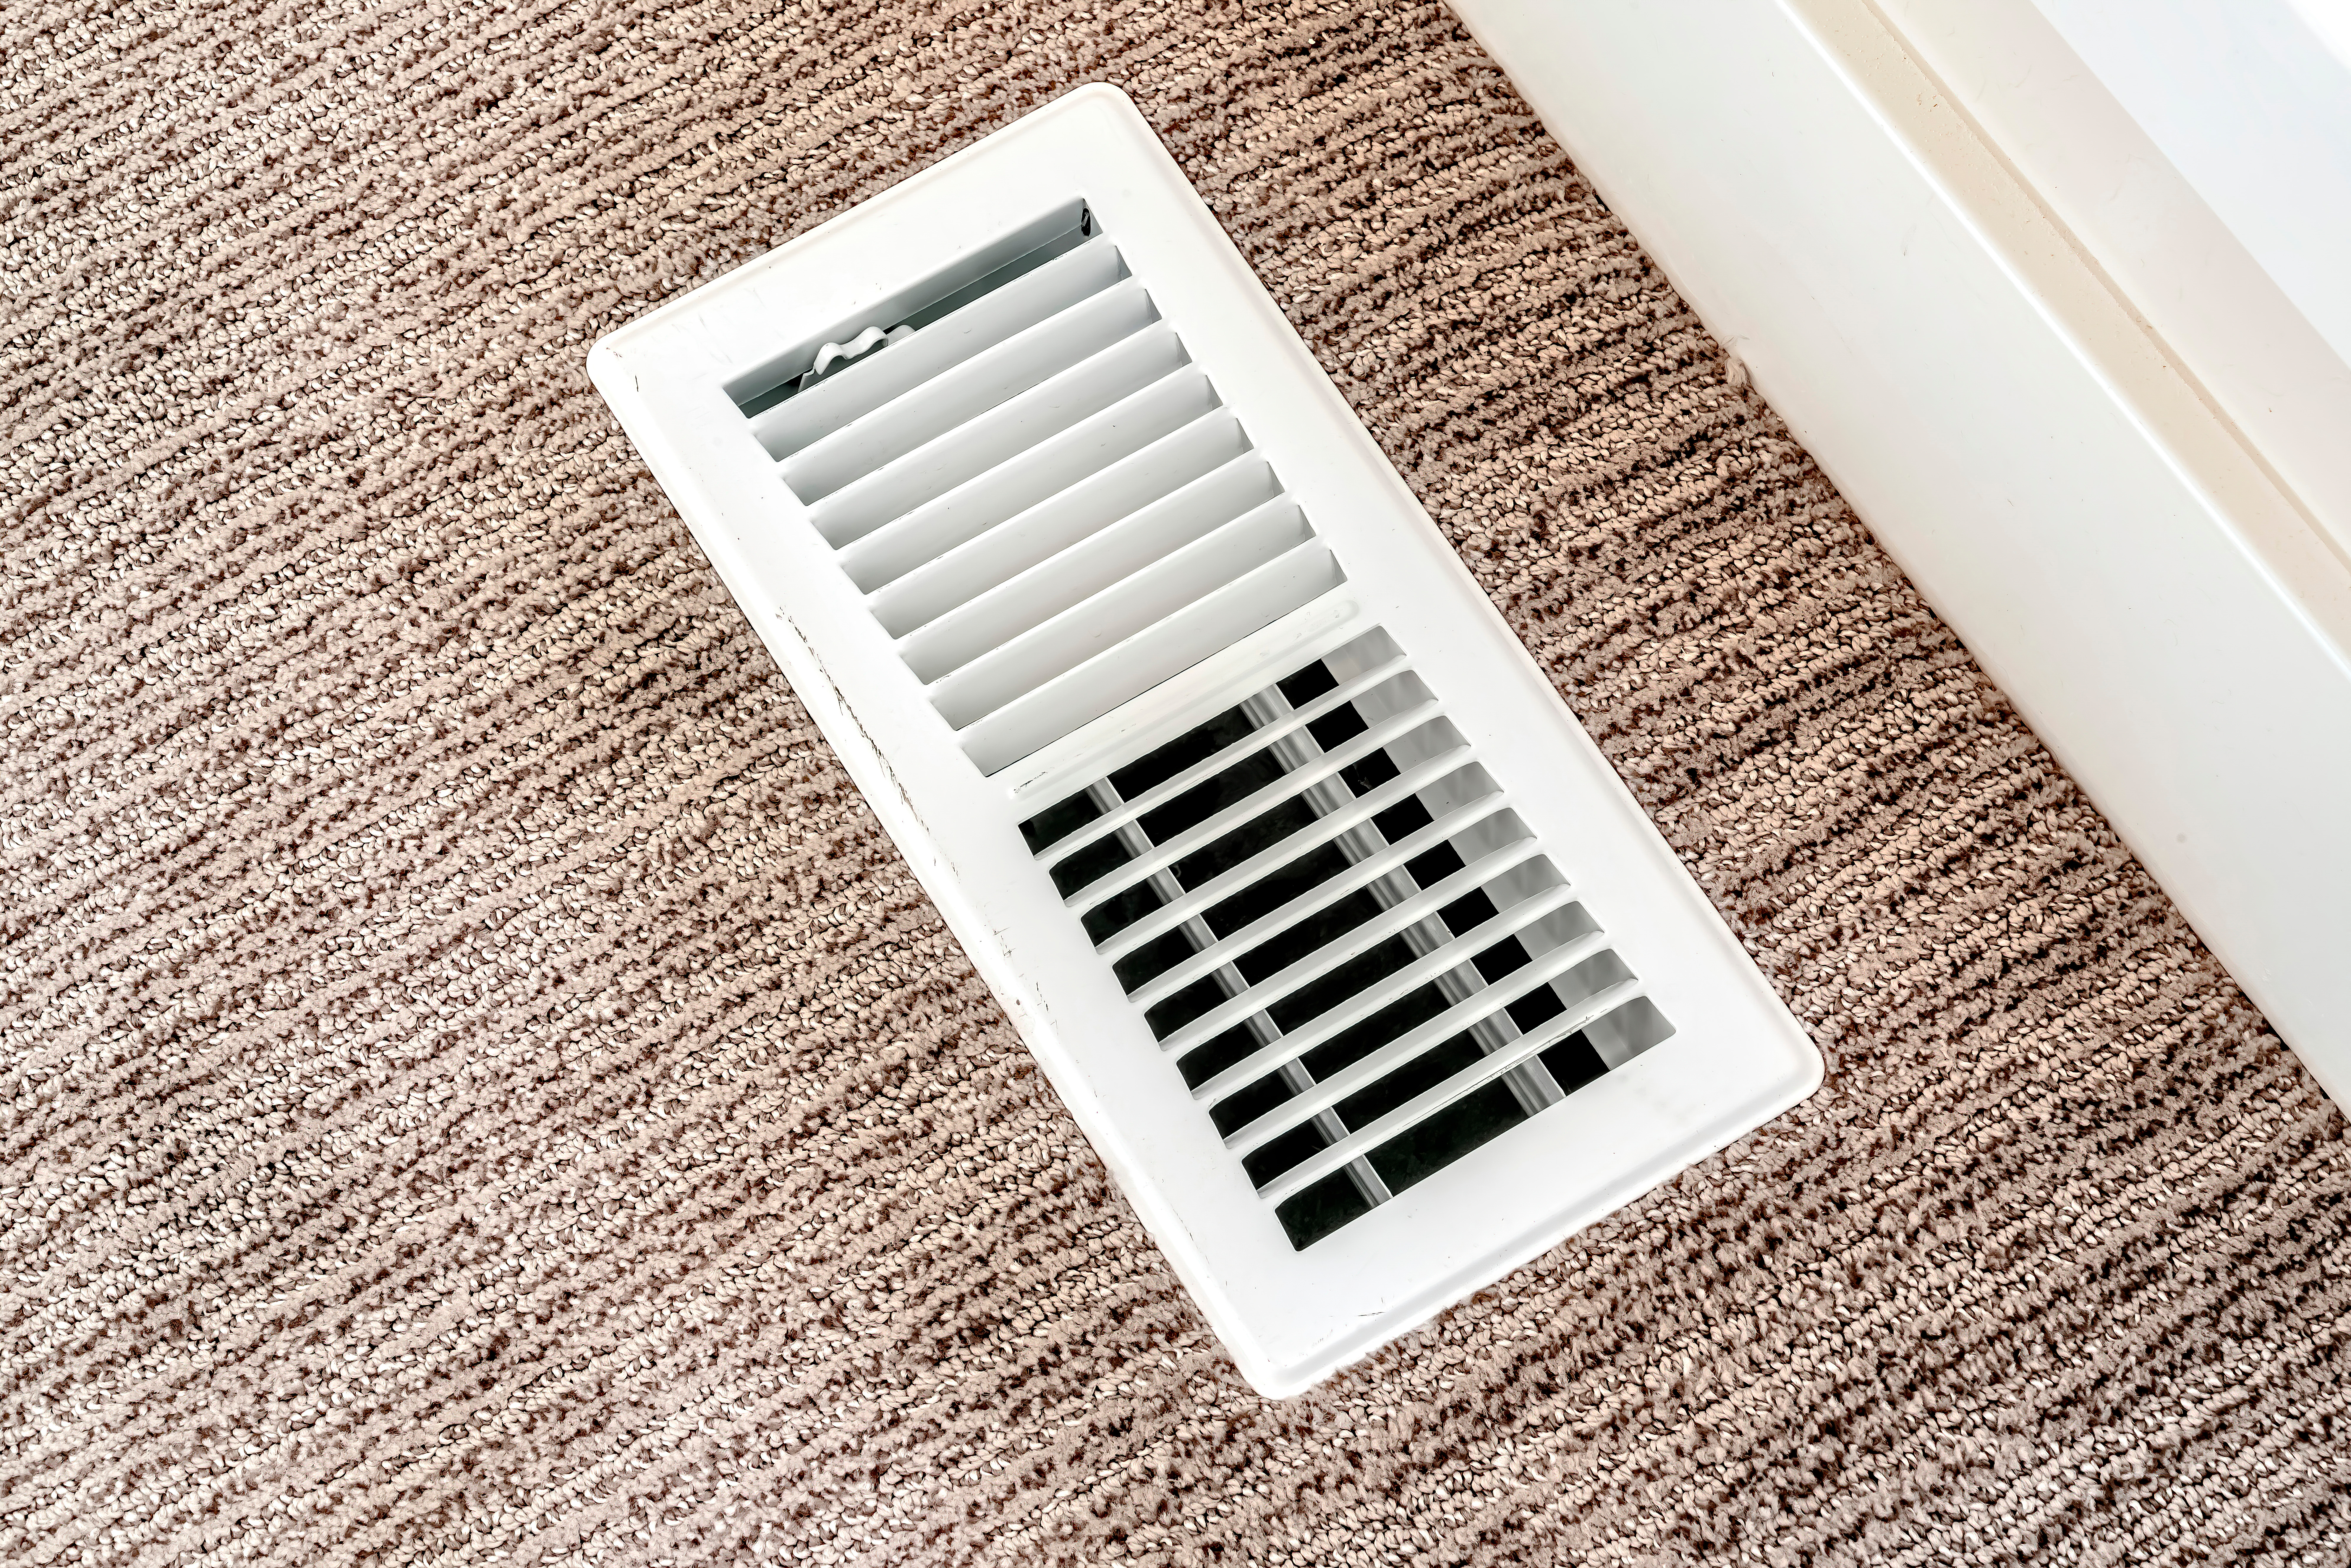 How Does Ventilation Affect Indoor Air Quality?